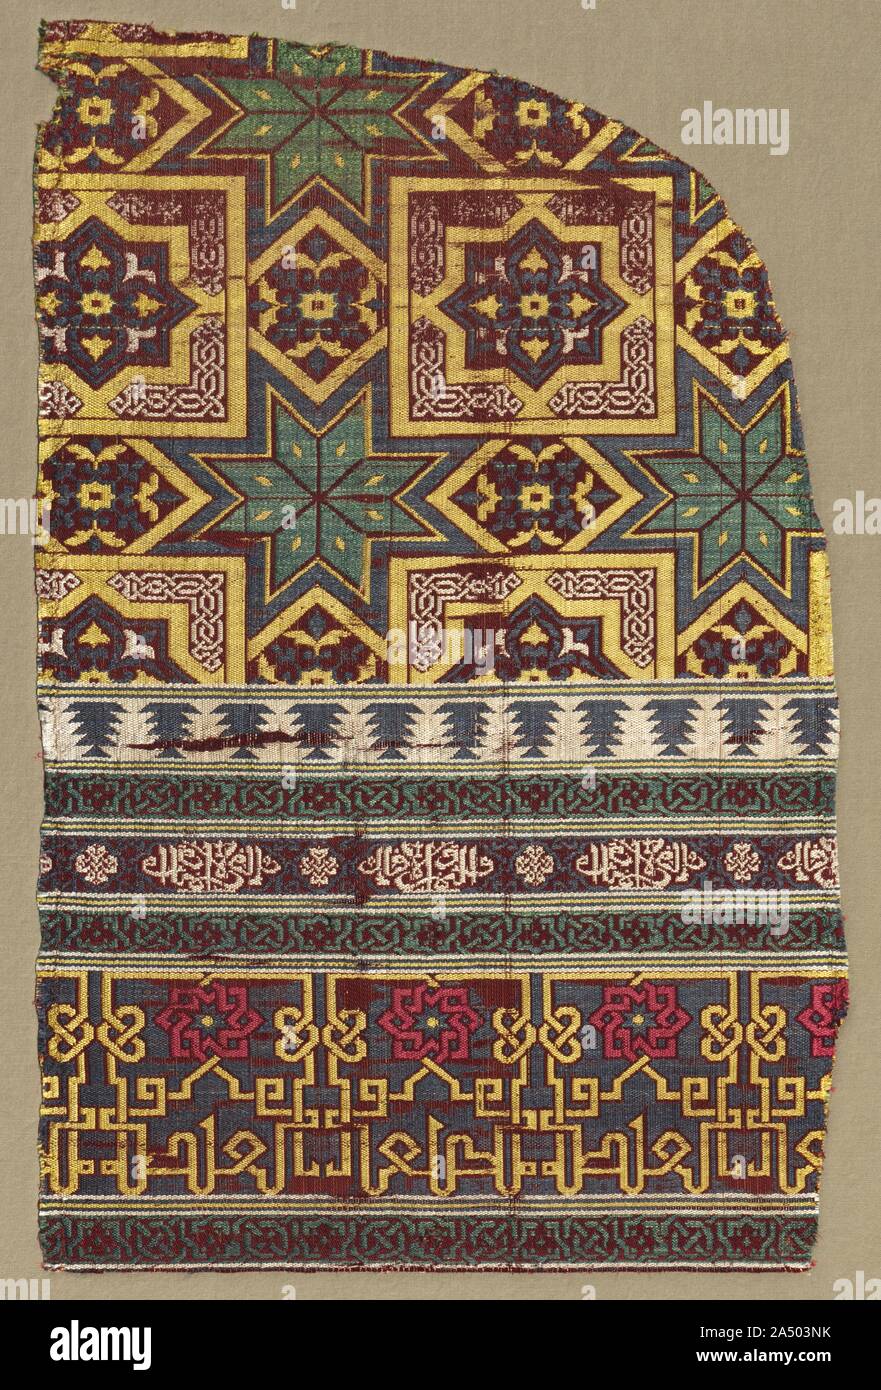 Alhambra hanging fragment with decorated bands, 1300s. The ability to combine different designs and colours harmoniously was one of the unparalleled achievements of Islamic art. This silk curtain fragment reveals juxtapositions of large and small scaled designs with curving and angular lines, all woven with bold colours in bands of varying widths. The contrasts are featured in the upper design of large squares positioned to form eight-pointed stars, in the narrow band with ivory-silk cursive script offering &quot;good fortune and prosperity,&quot; and in the wide band with large yellow-silk ku Stock Photo